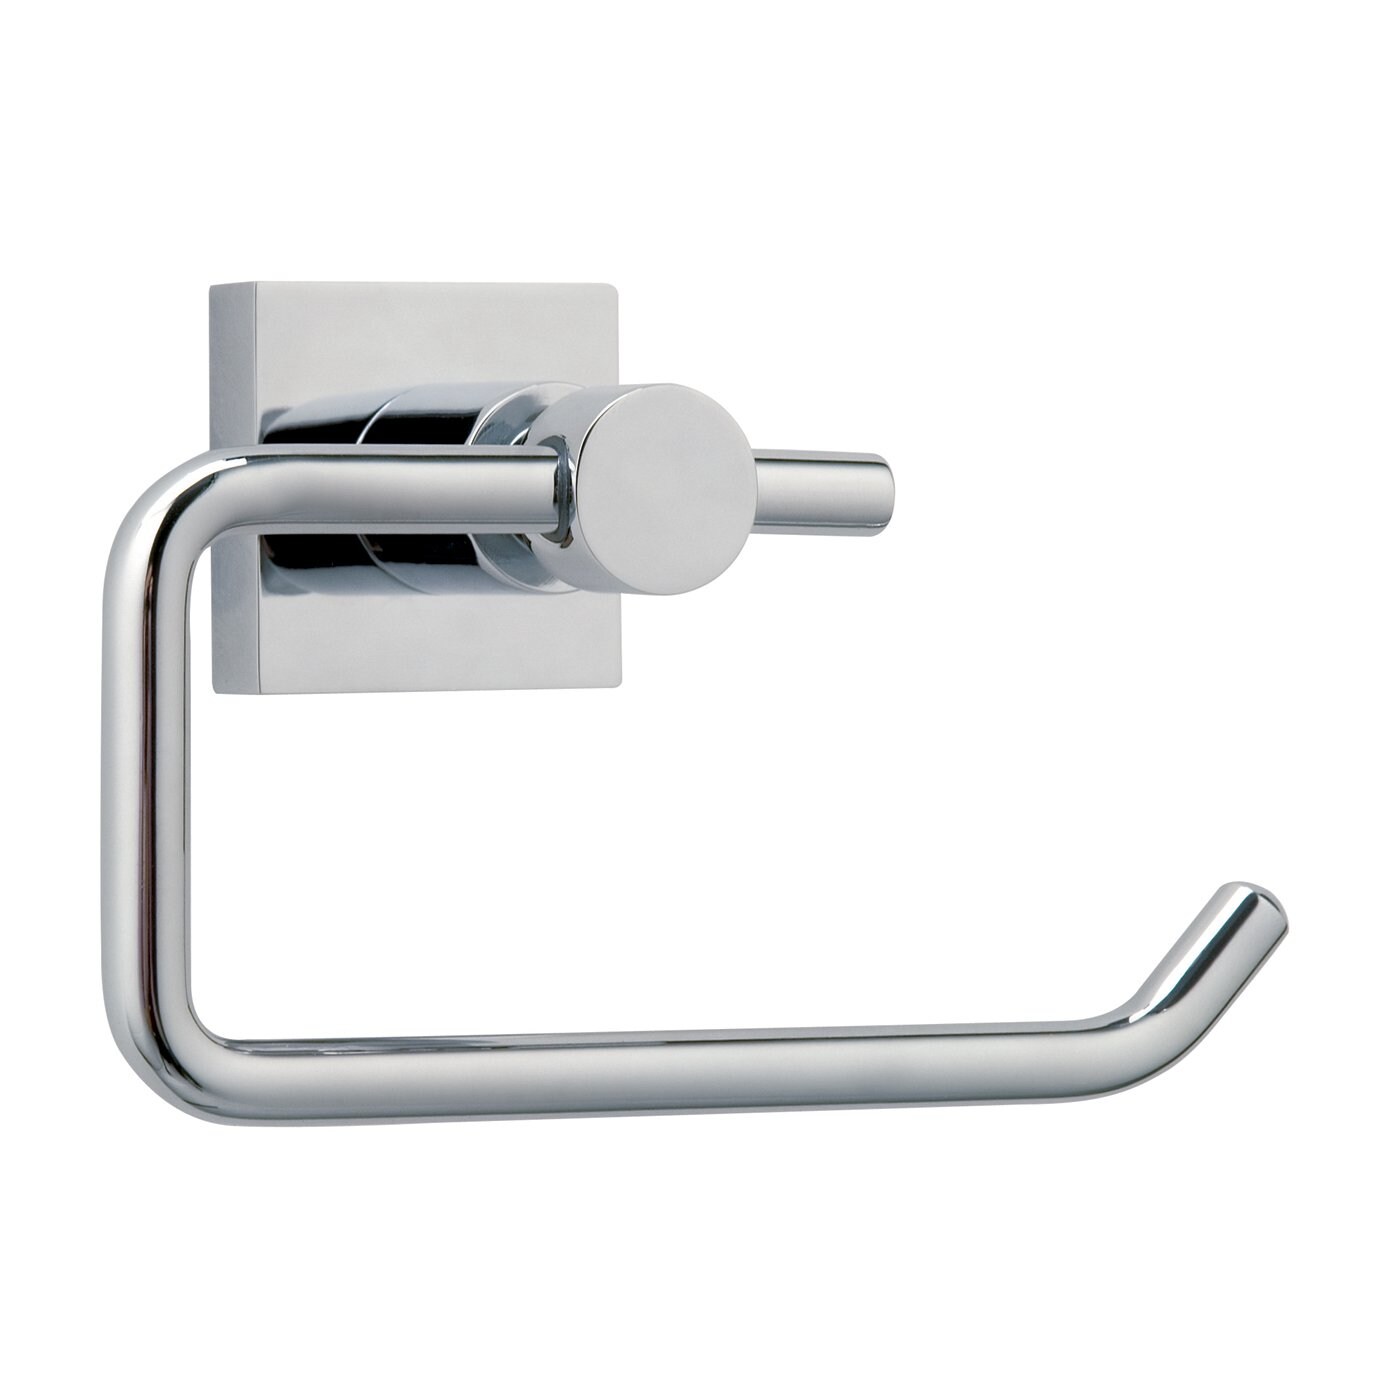 Dgwhyc Toilet Paper Holder 3M Toilet Paper Holder No Drilling for Bathroom and Washroom SUS304 Stainless Steel Brushed Nickel (Silver) Dg-tpa22, Silve